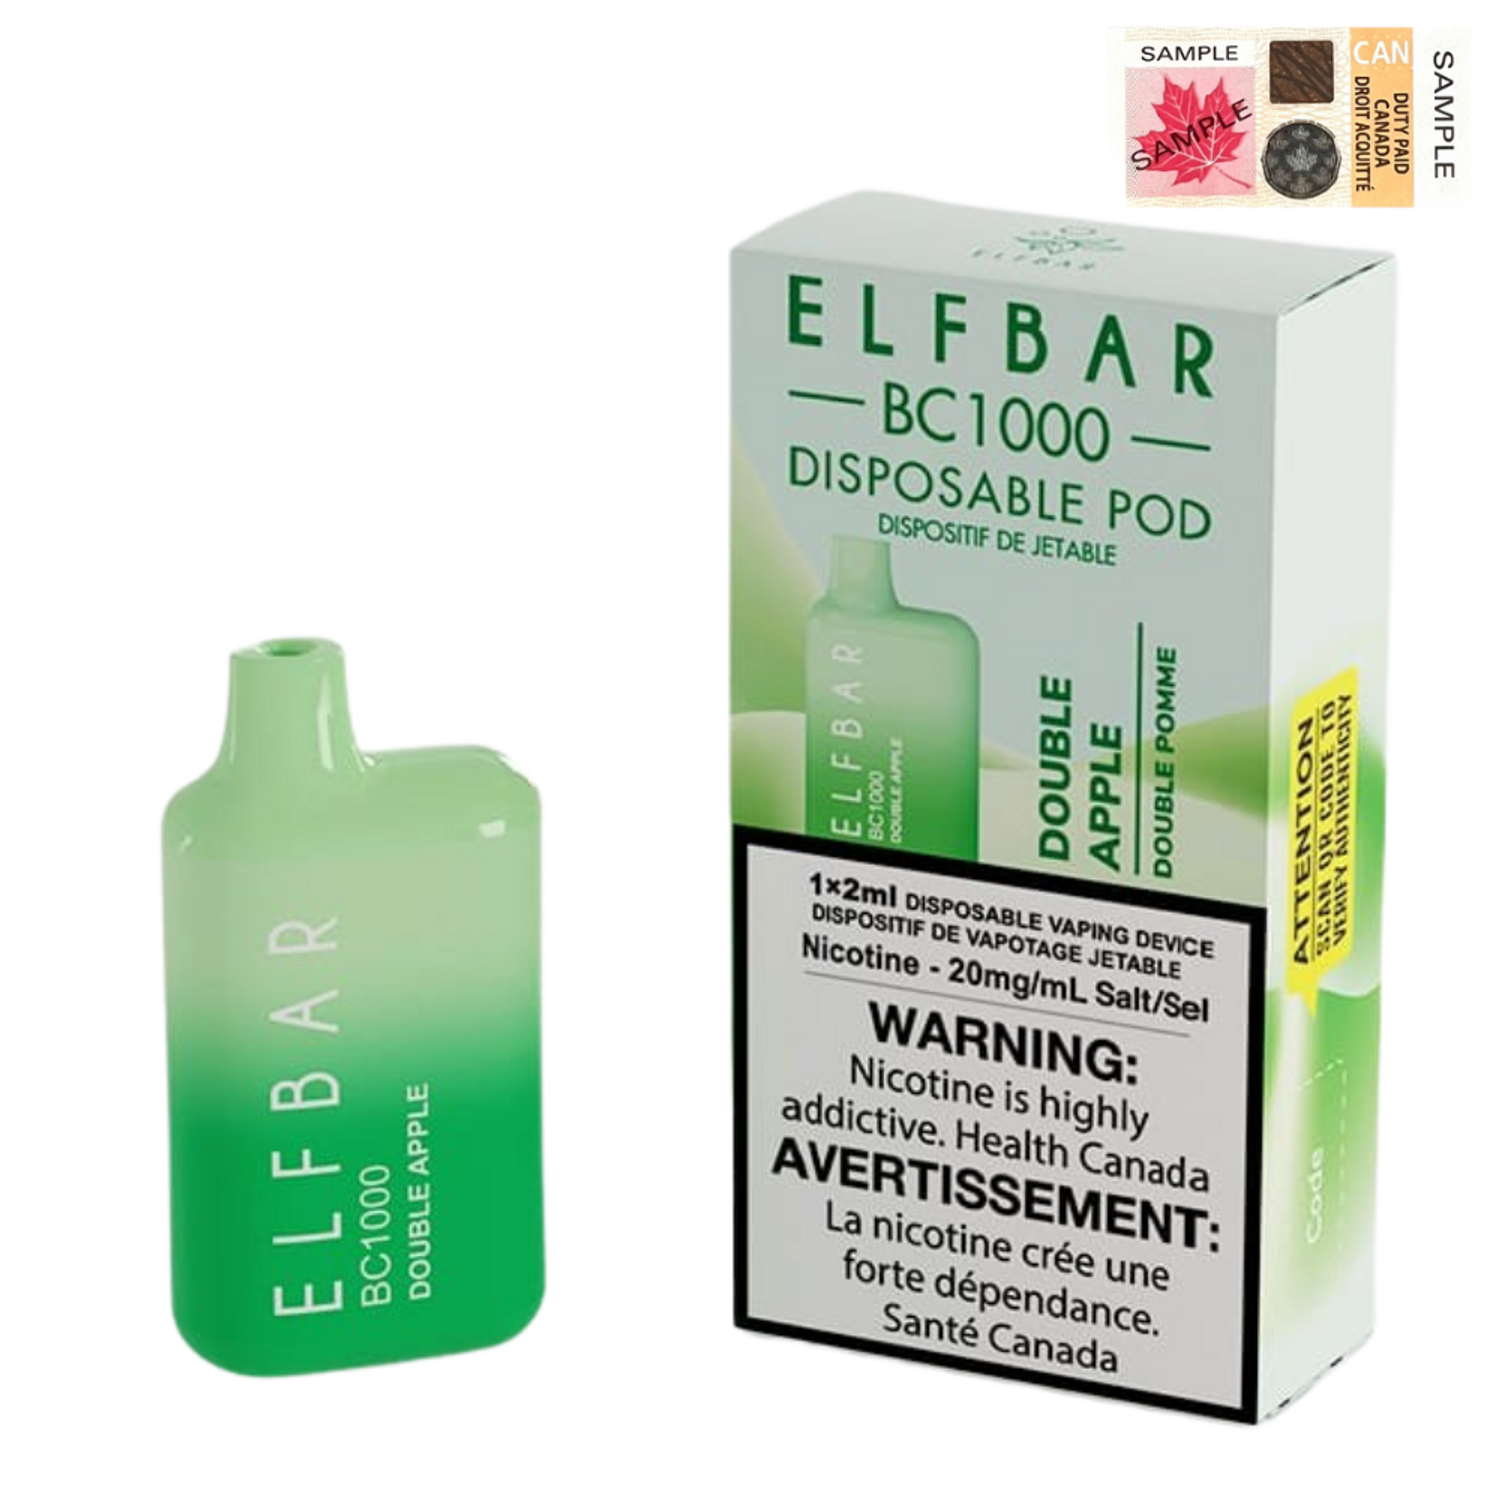 [Disposables] ELF Bar BC1000 - Double Apple Disposable Pod Systems Vancouver Toronto Calgary Richmond Montreal Kingsway Winnipeg Quebec Coquitlam Canada Canadian Vapes Shop Free Shipping E-Juice Mods Nic Salt